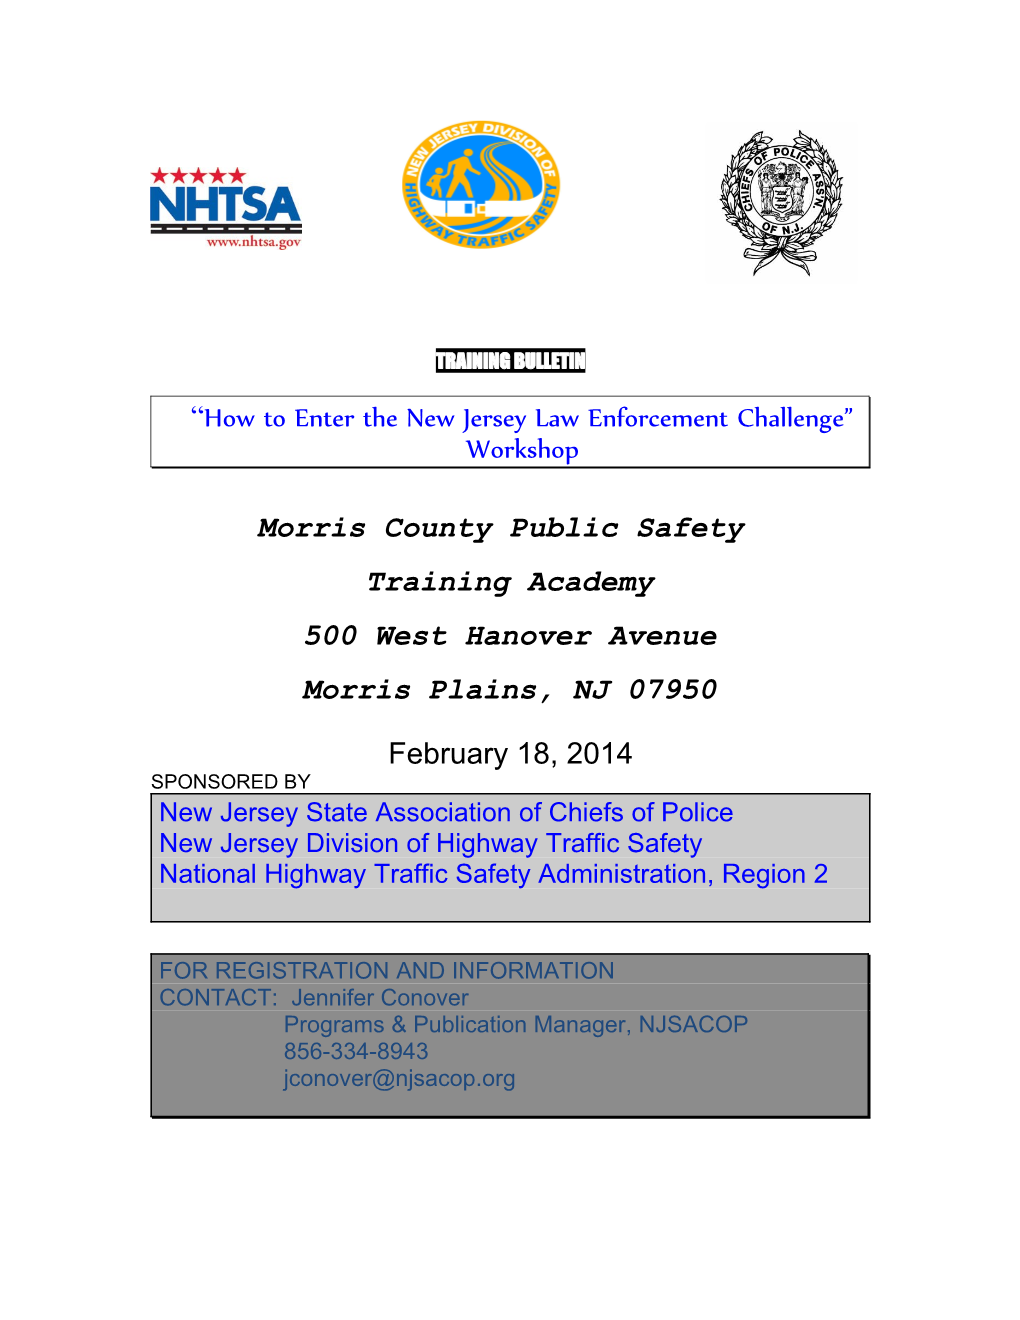 How to Enter the New Jersey Law Enforcement Challenge Workshop